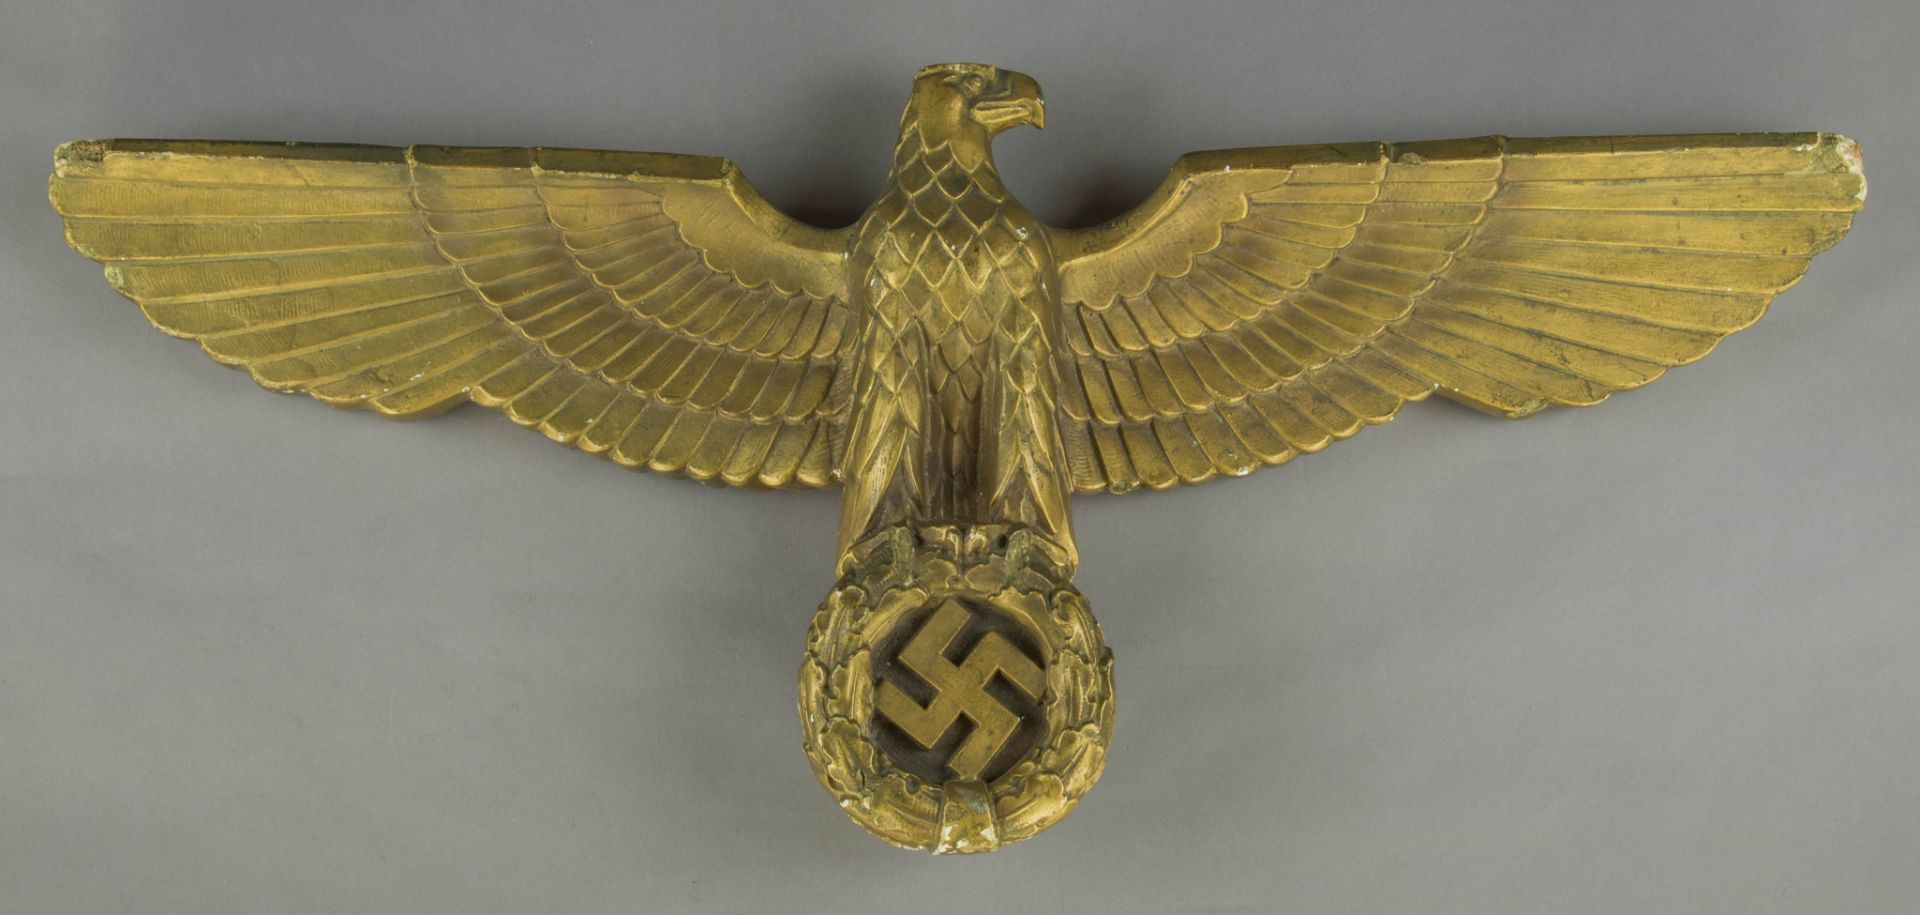 THE GOLDEN EAGLE FROM ADOLF HITLER'S REICHSCHANCELLERY BEDROOM - Image 2 of 13